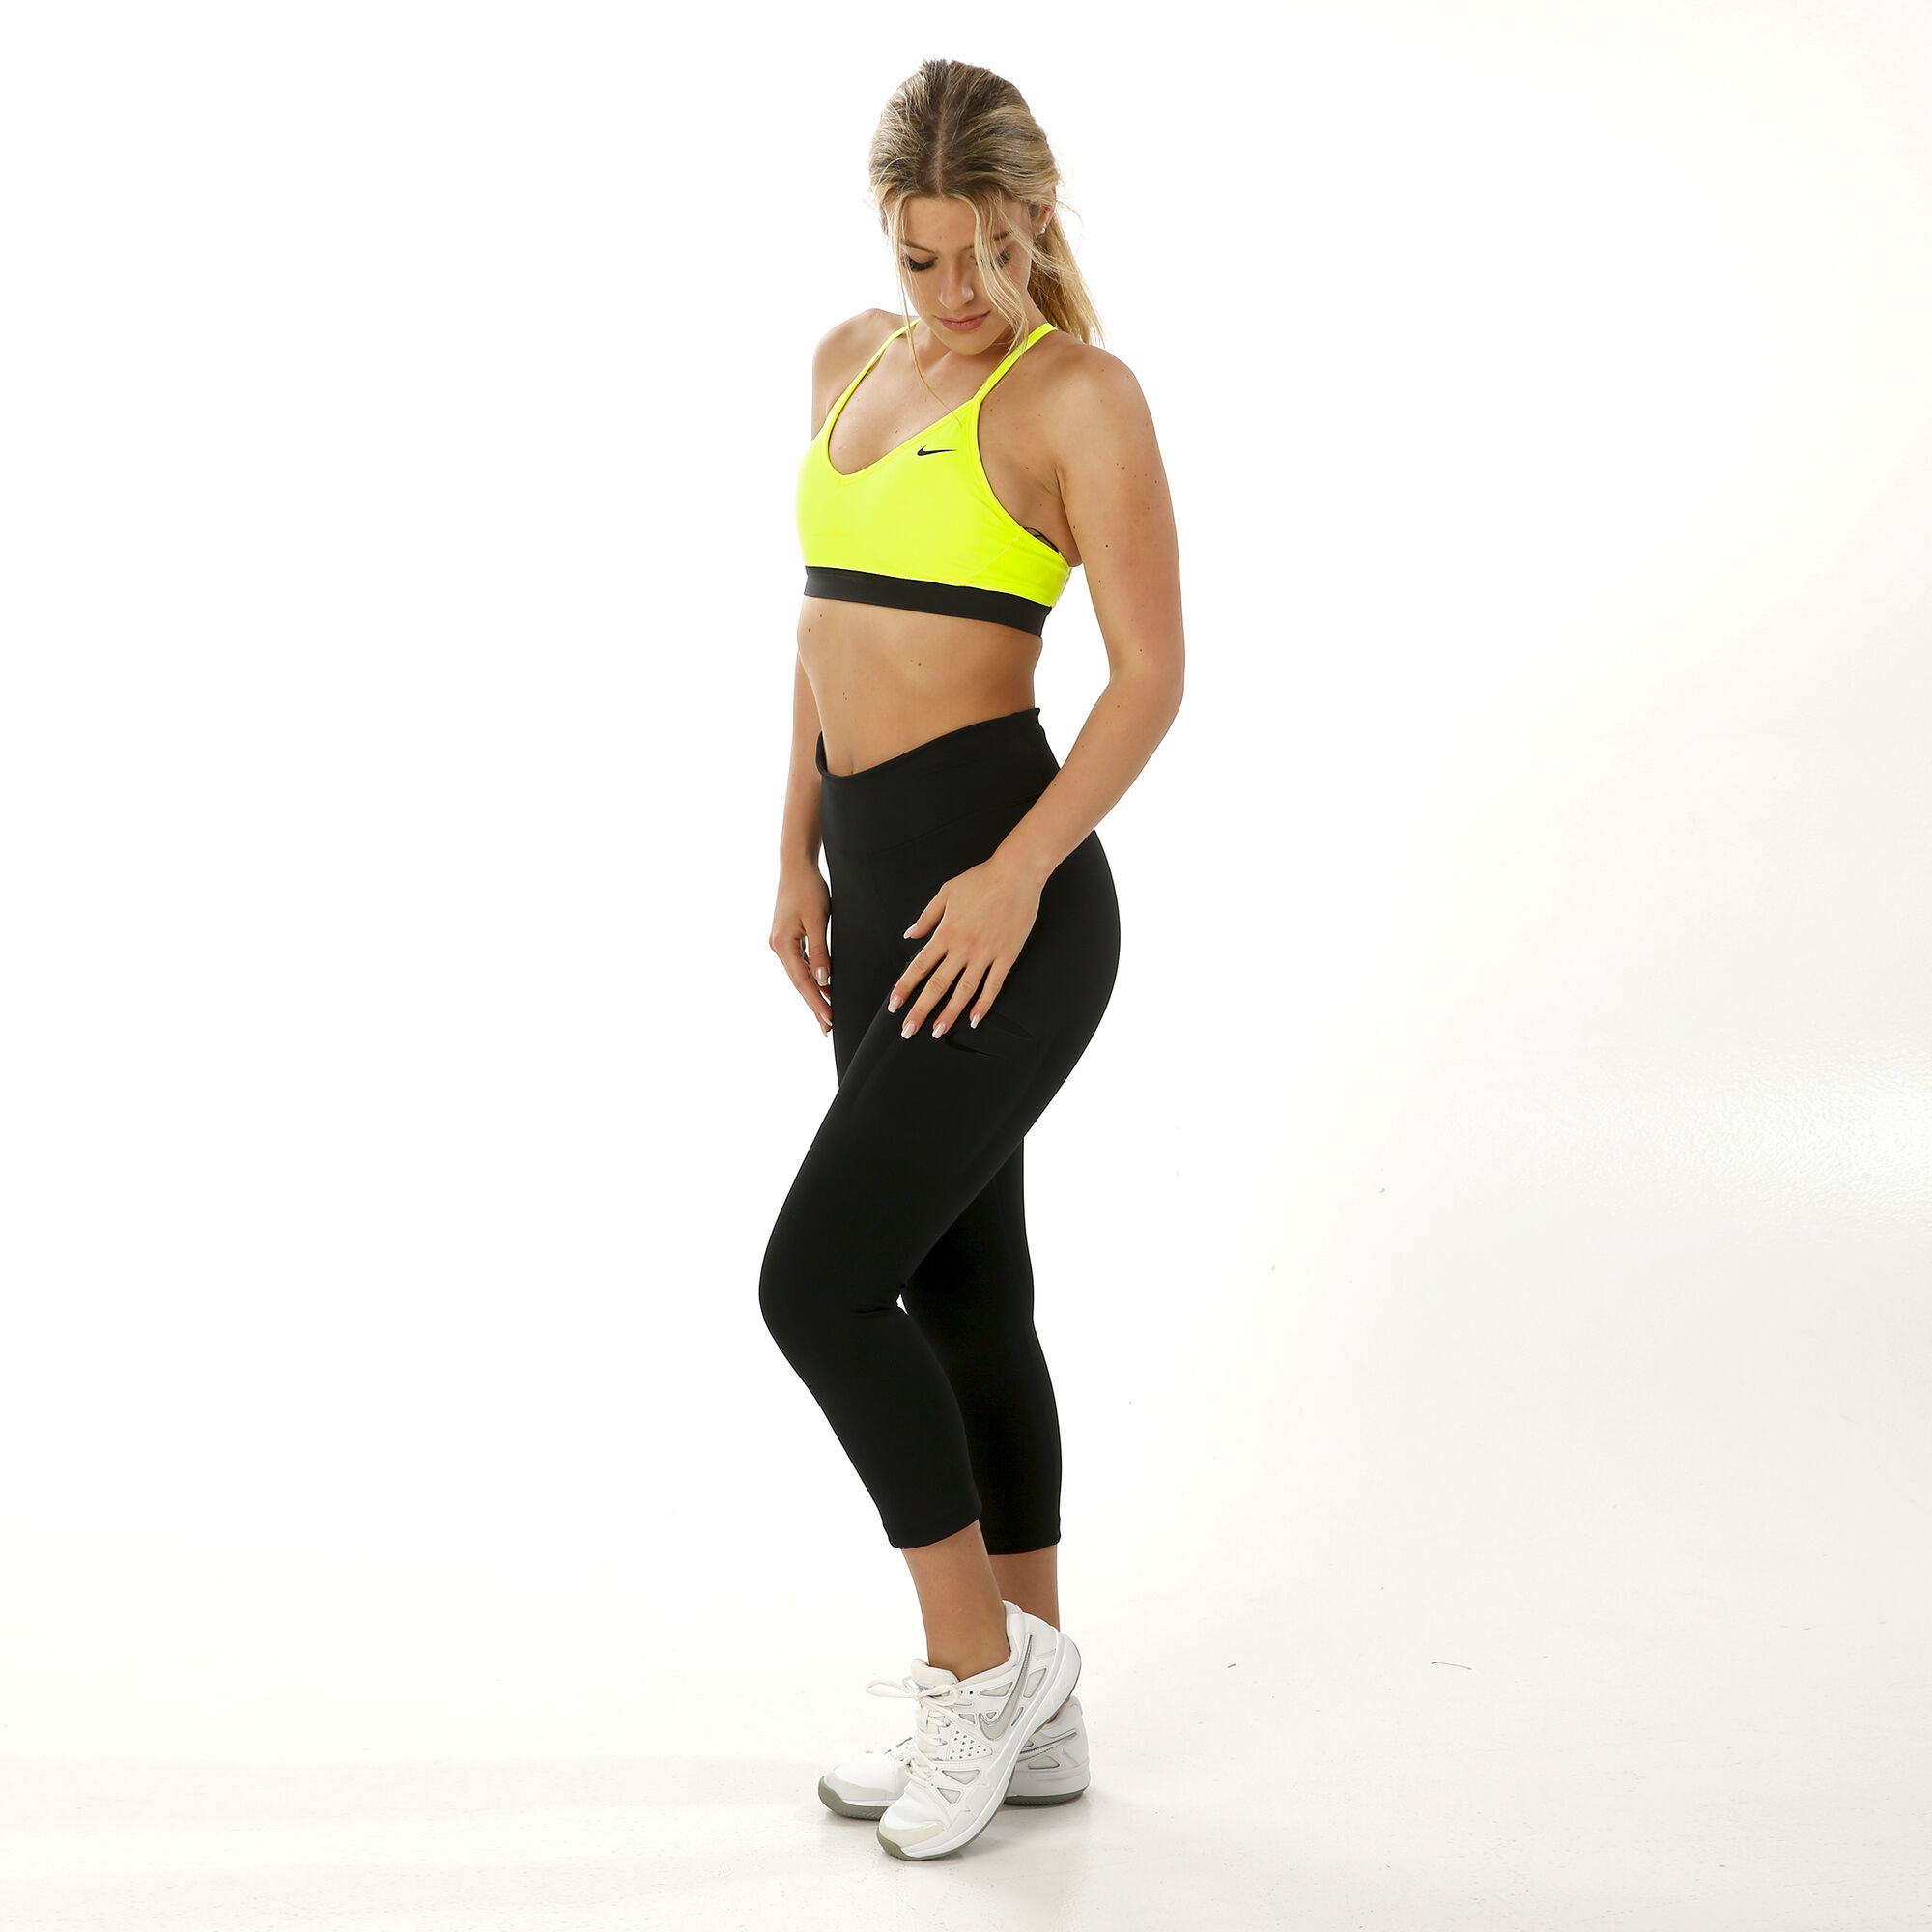 See Price in Bag Nike Indy Dance Sports Bras.